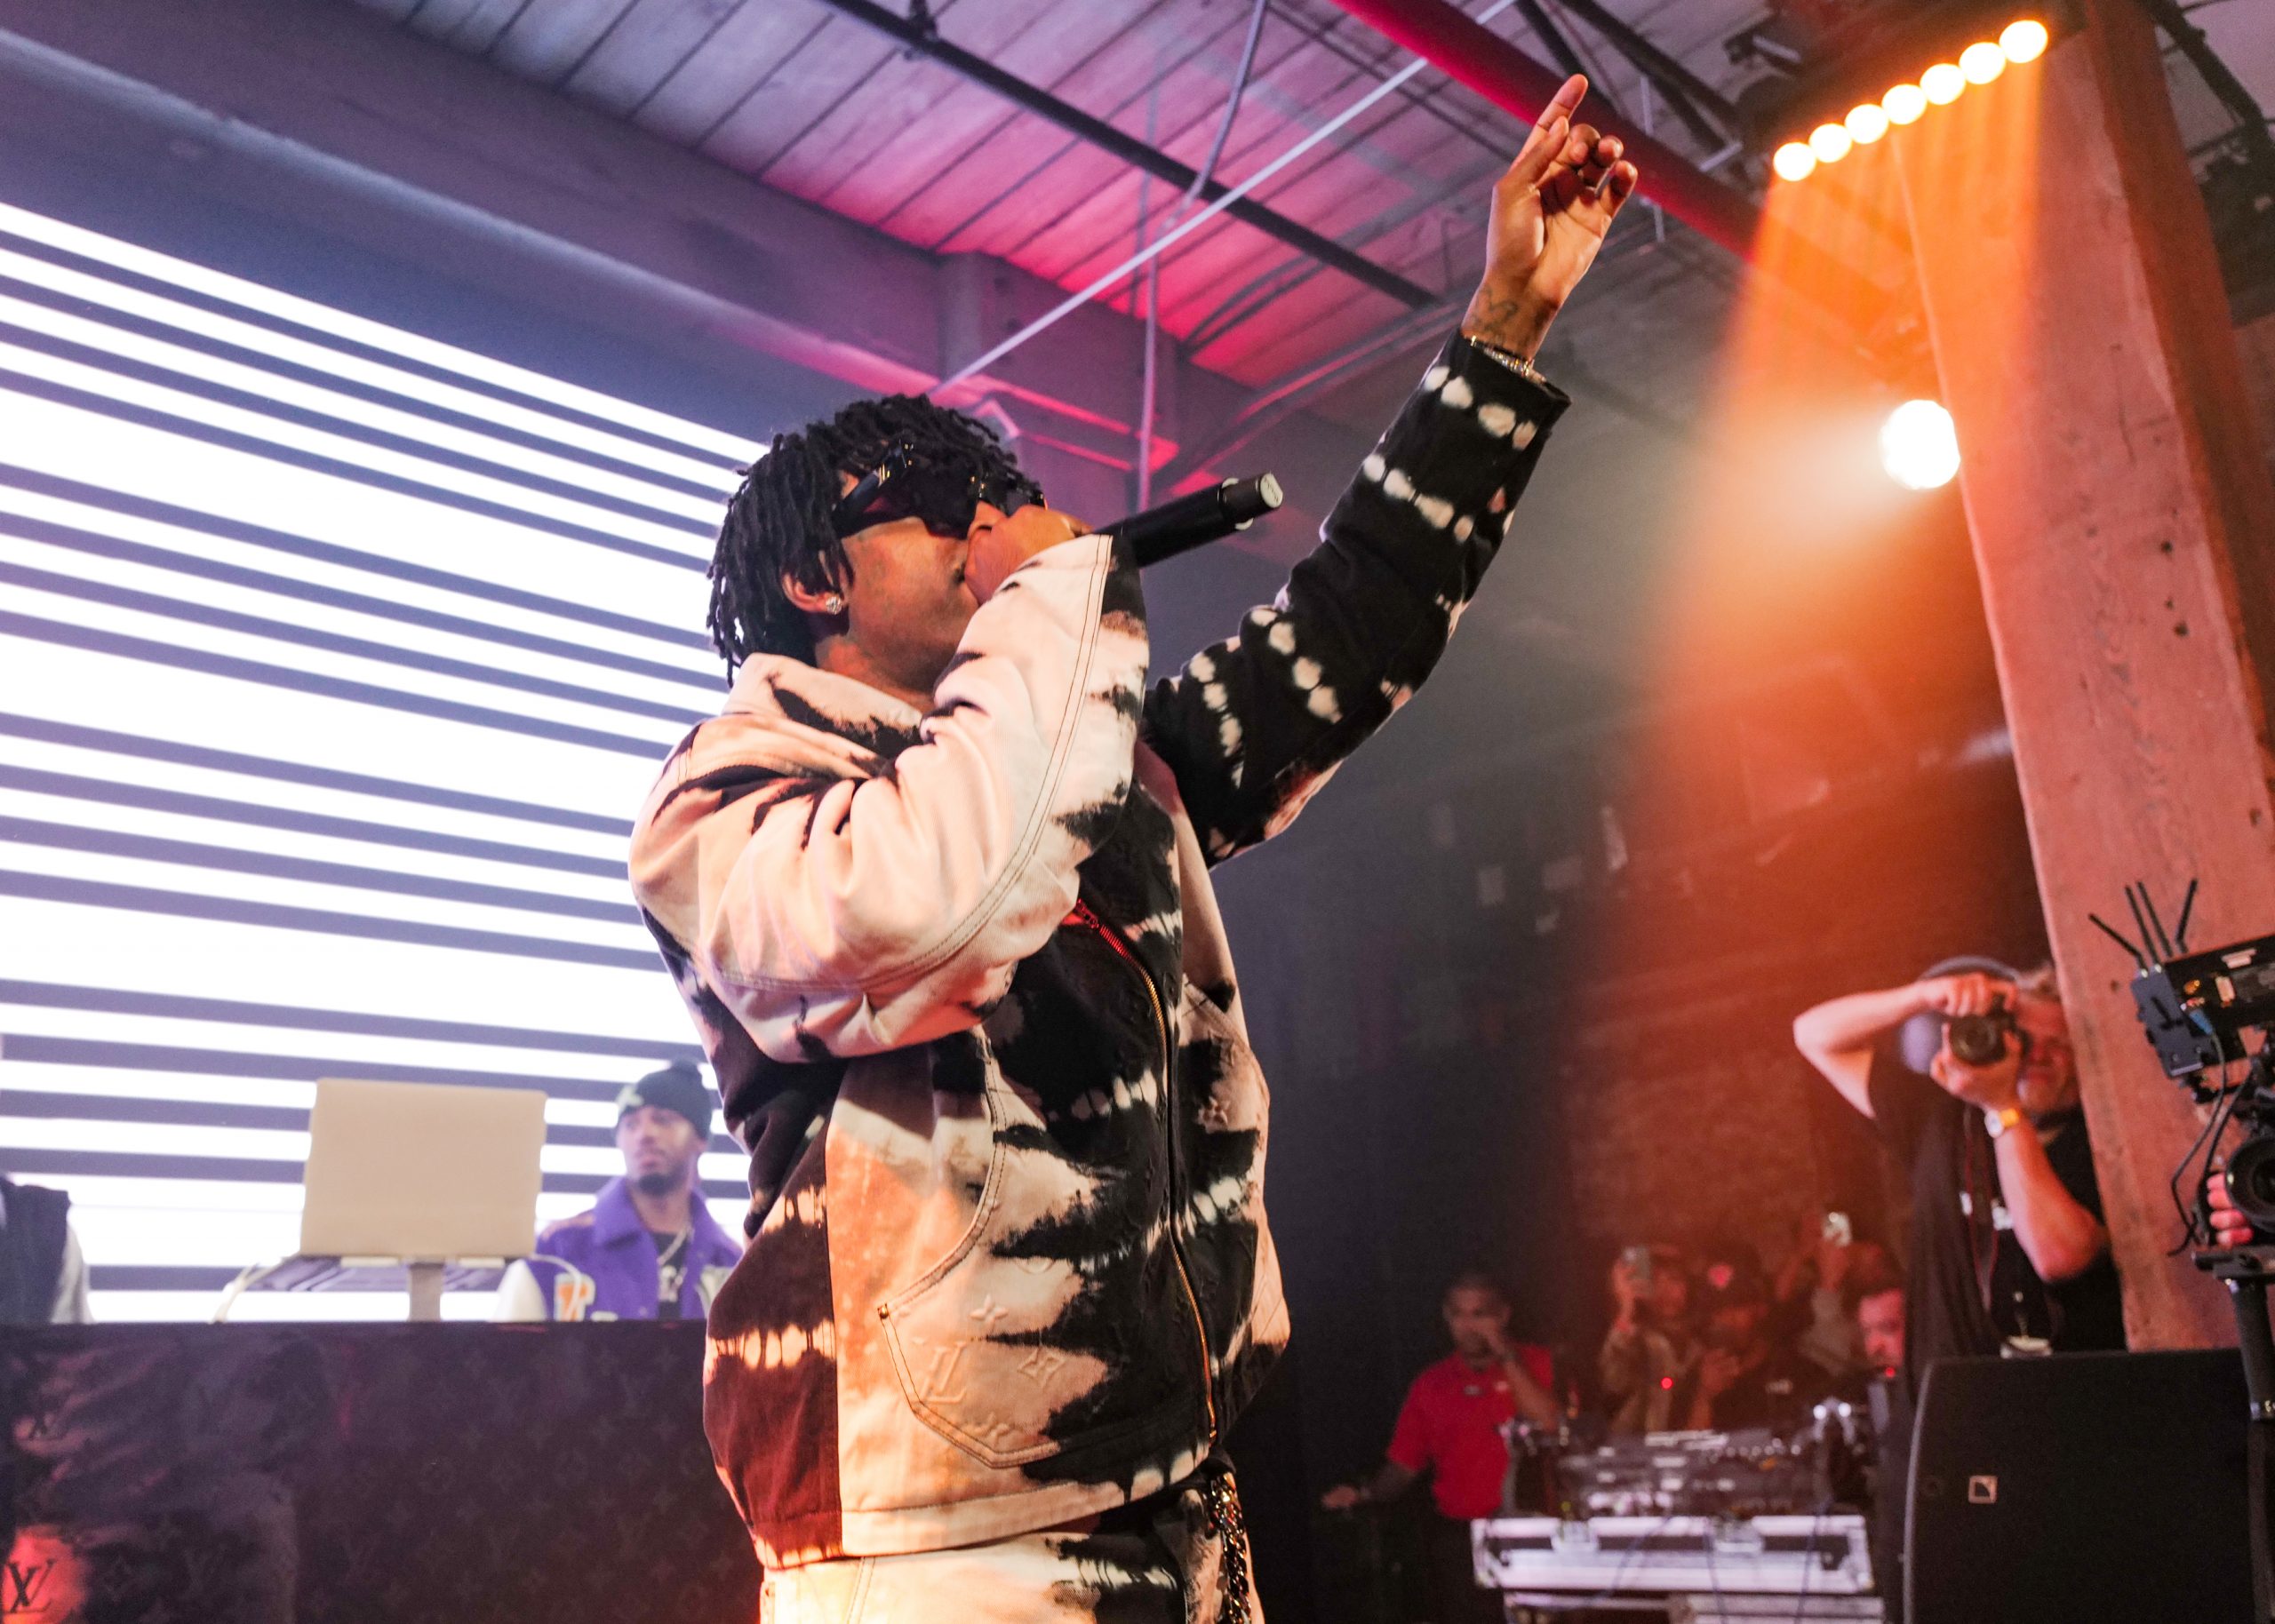 Louis Vuitton celebrates “Nike's Air Force 1 by Virgil Abloh” exhibition  opening event. 21 Savage and Metro Boomin closed the exhibition opening  event with a dope performance!